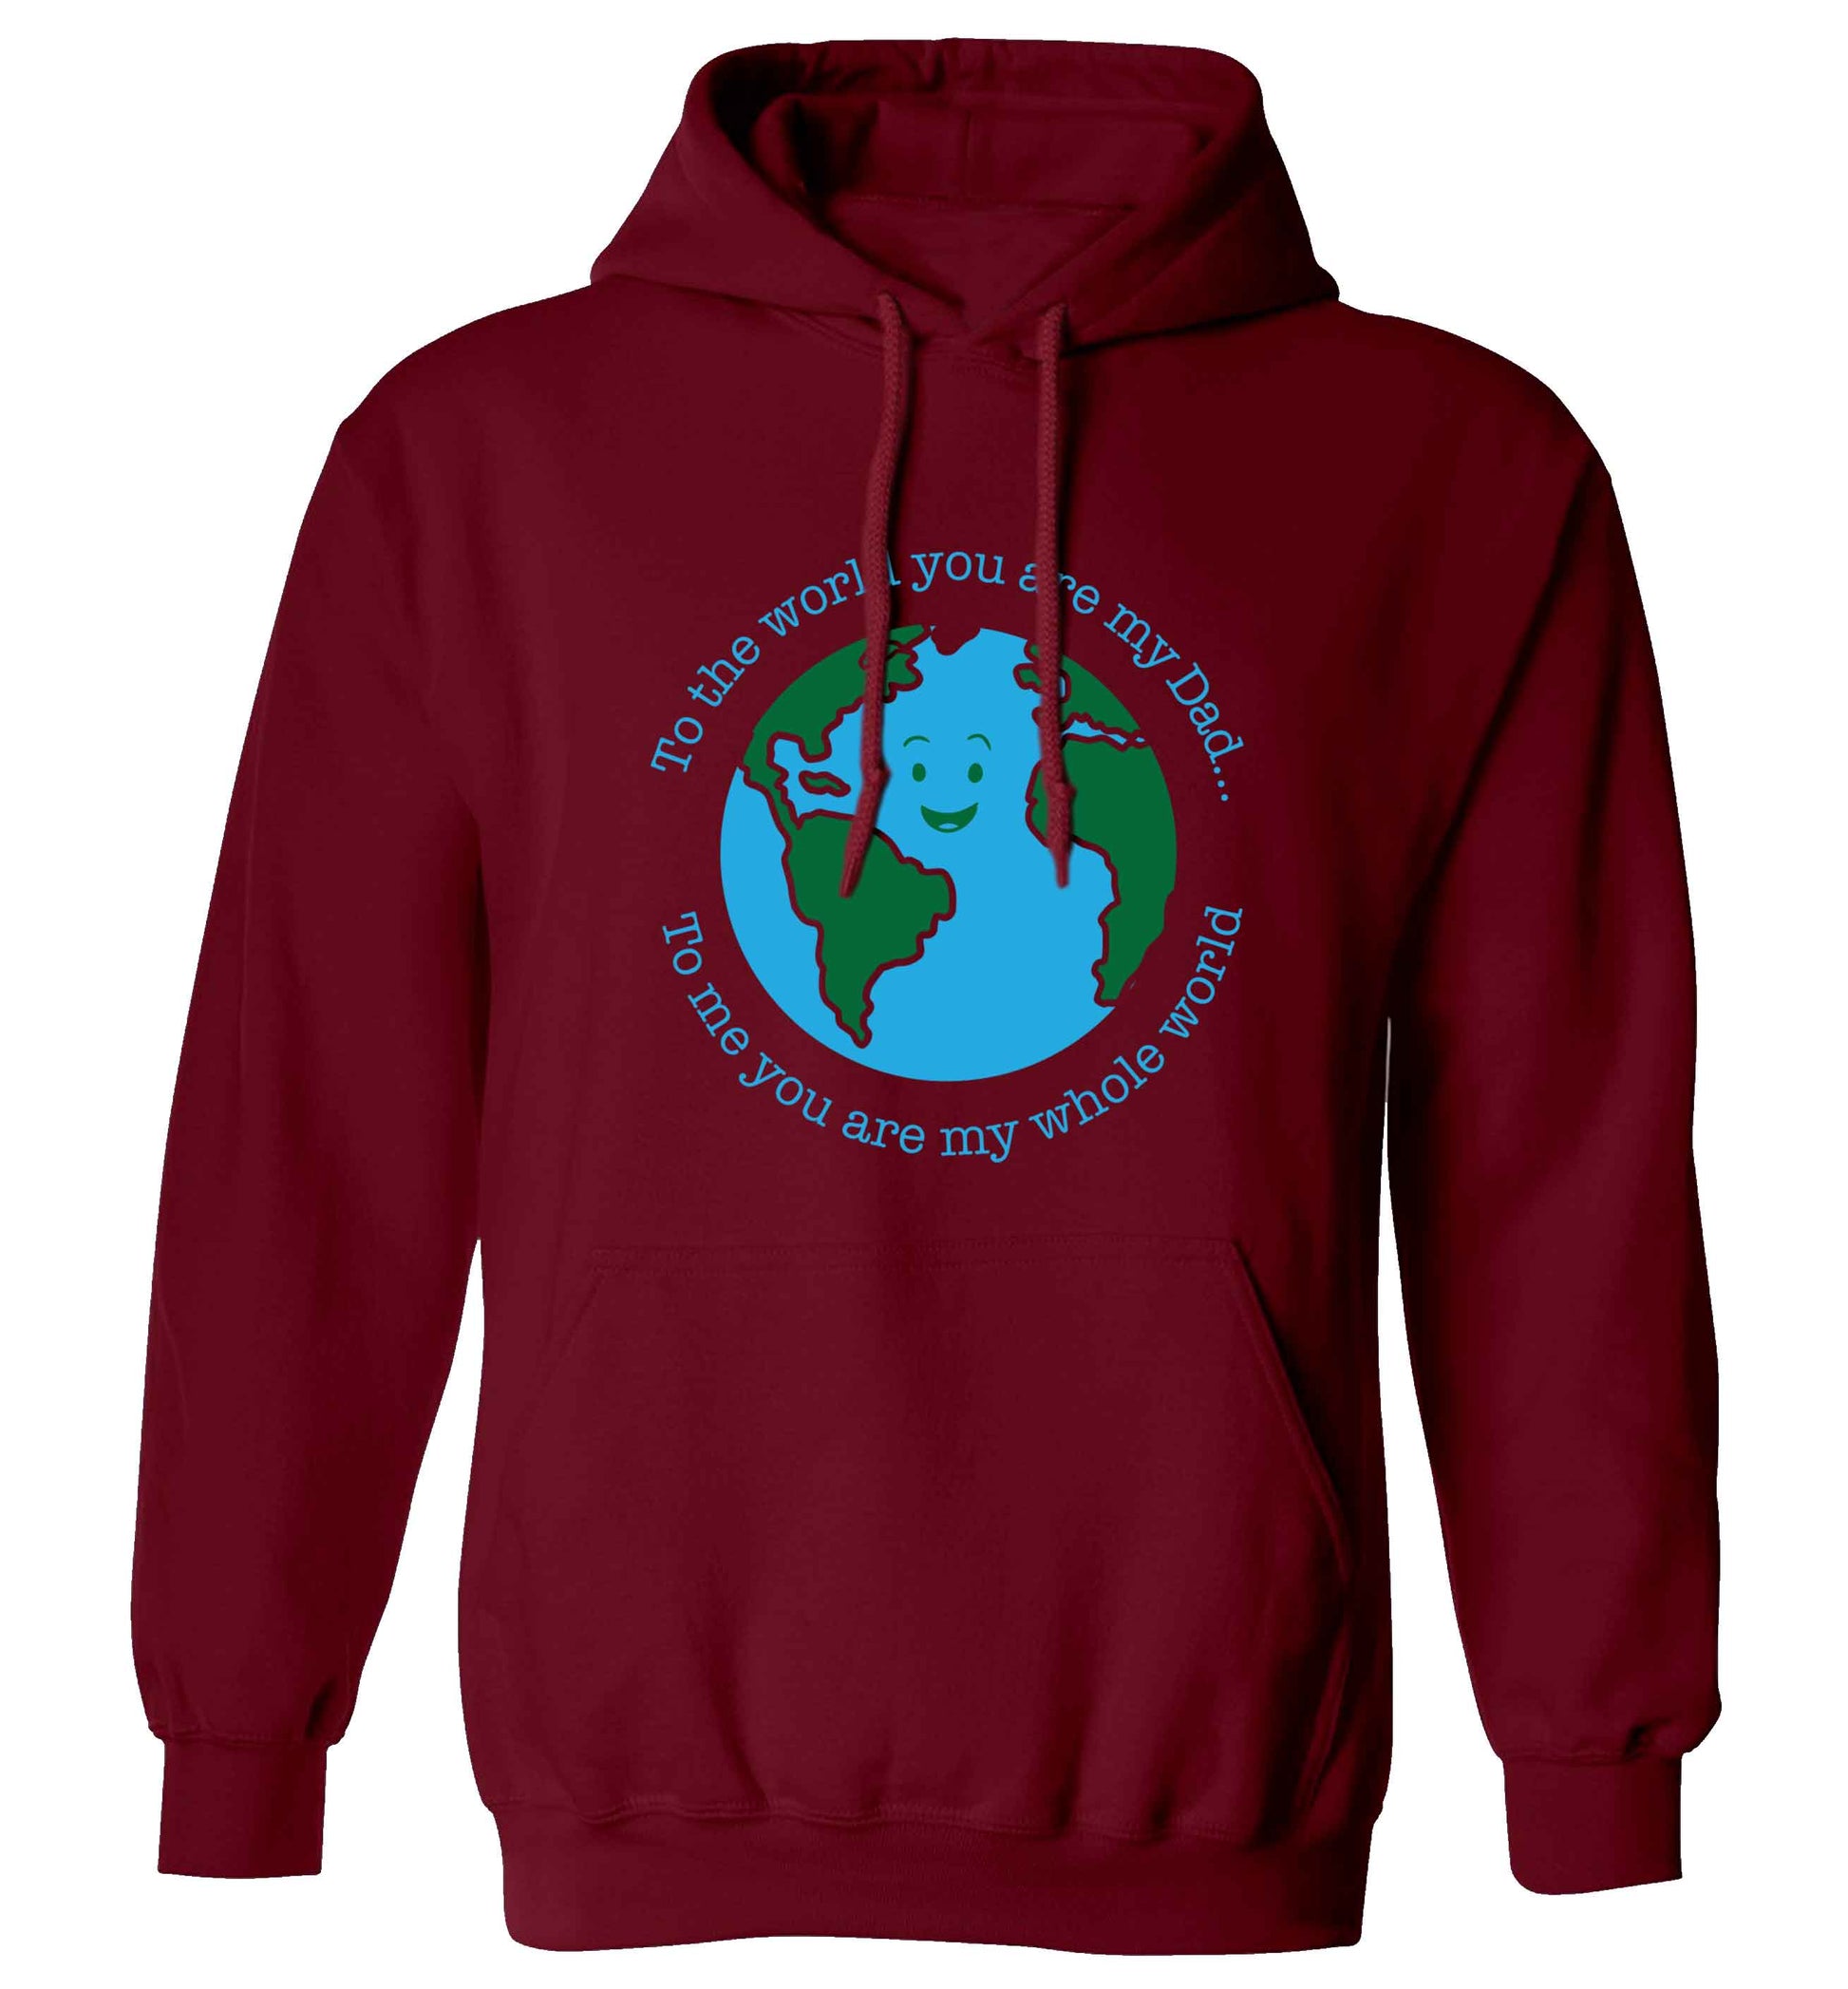 To the world you are my dad, to me you are my whole world adults unisex maroon hoodie 2XL